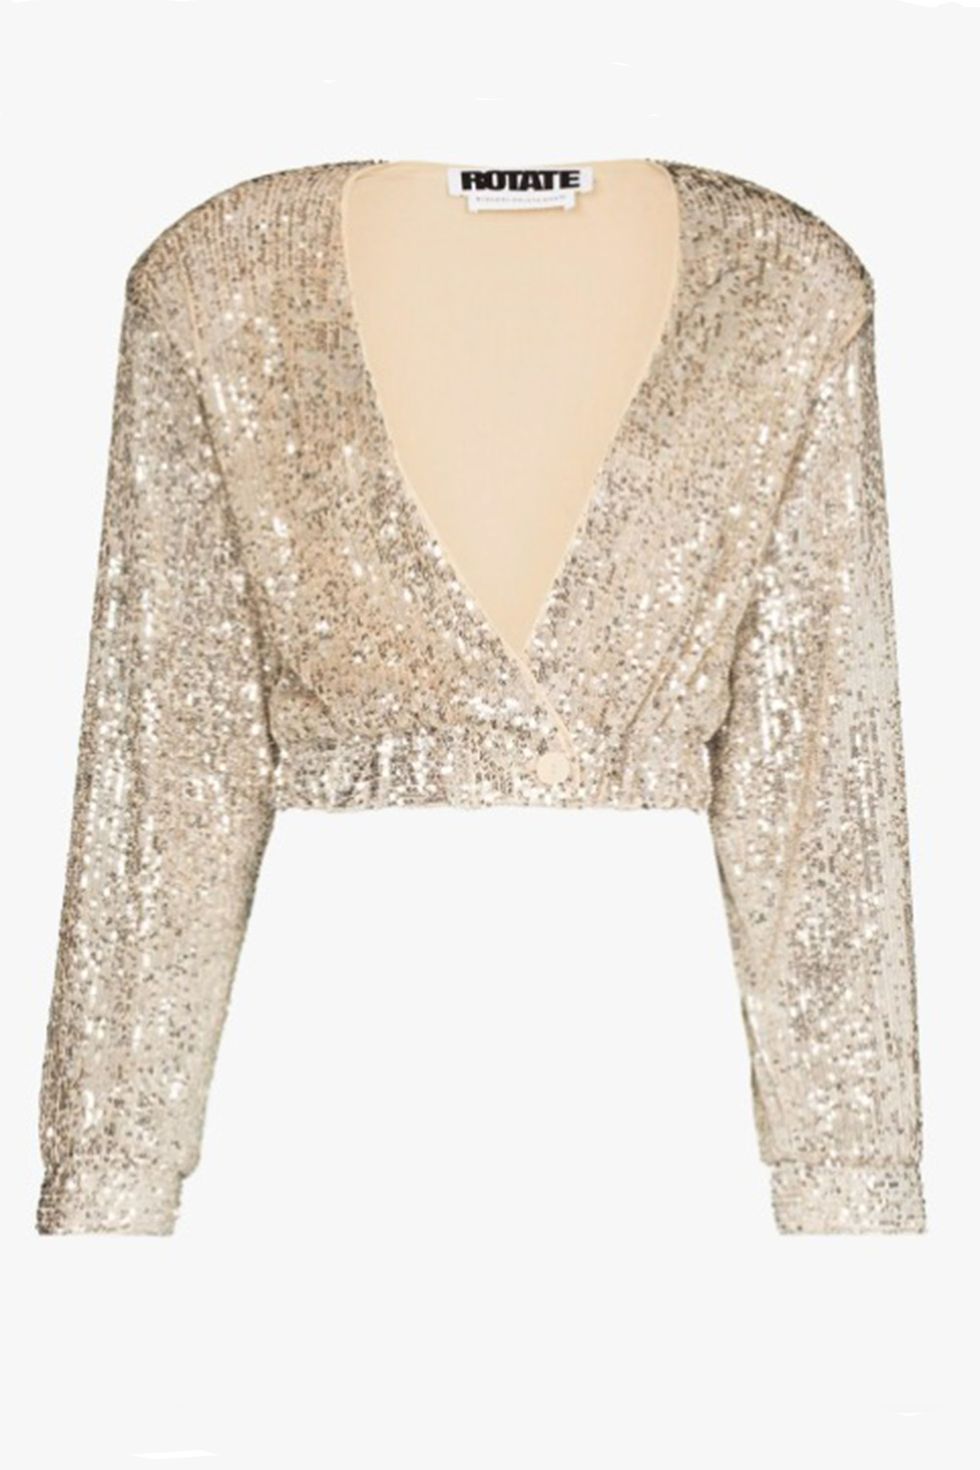 rotate sparkly cardigan   best christmas jumpers